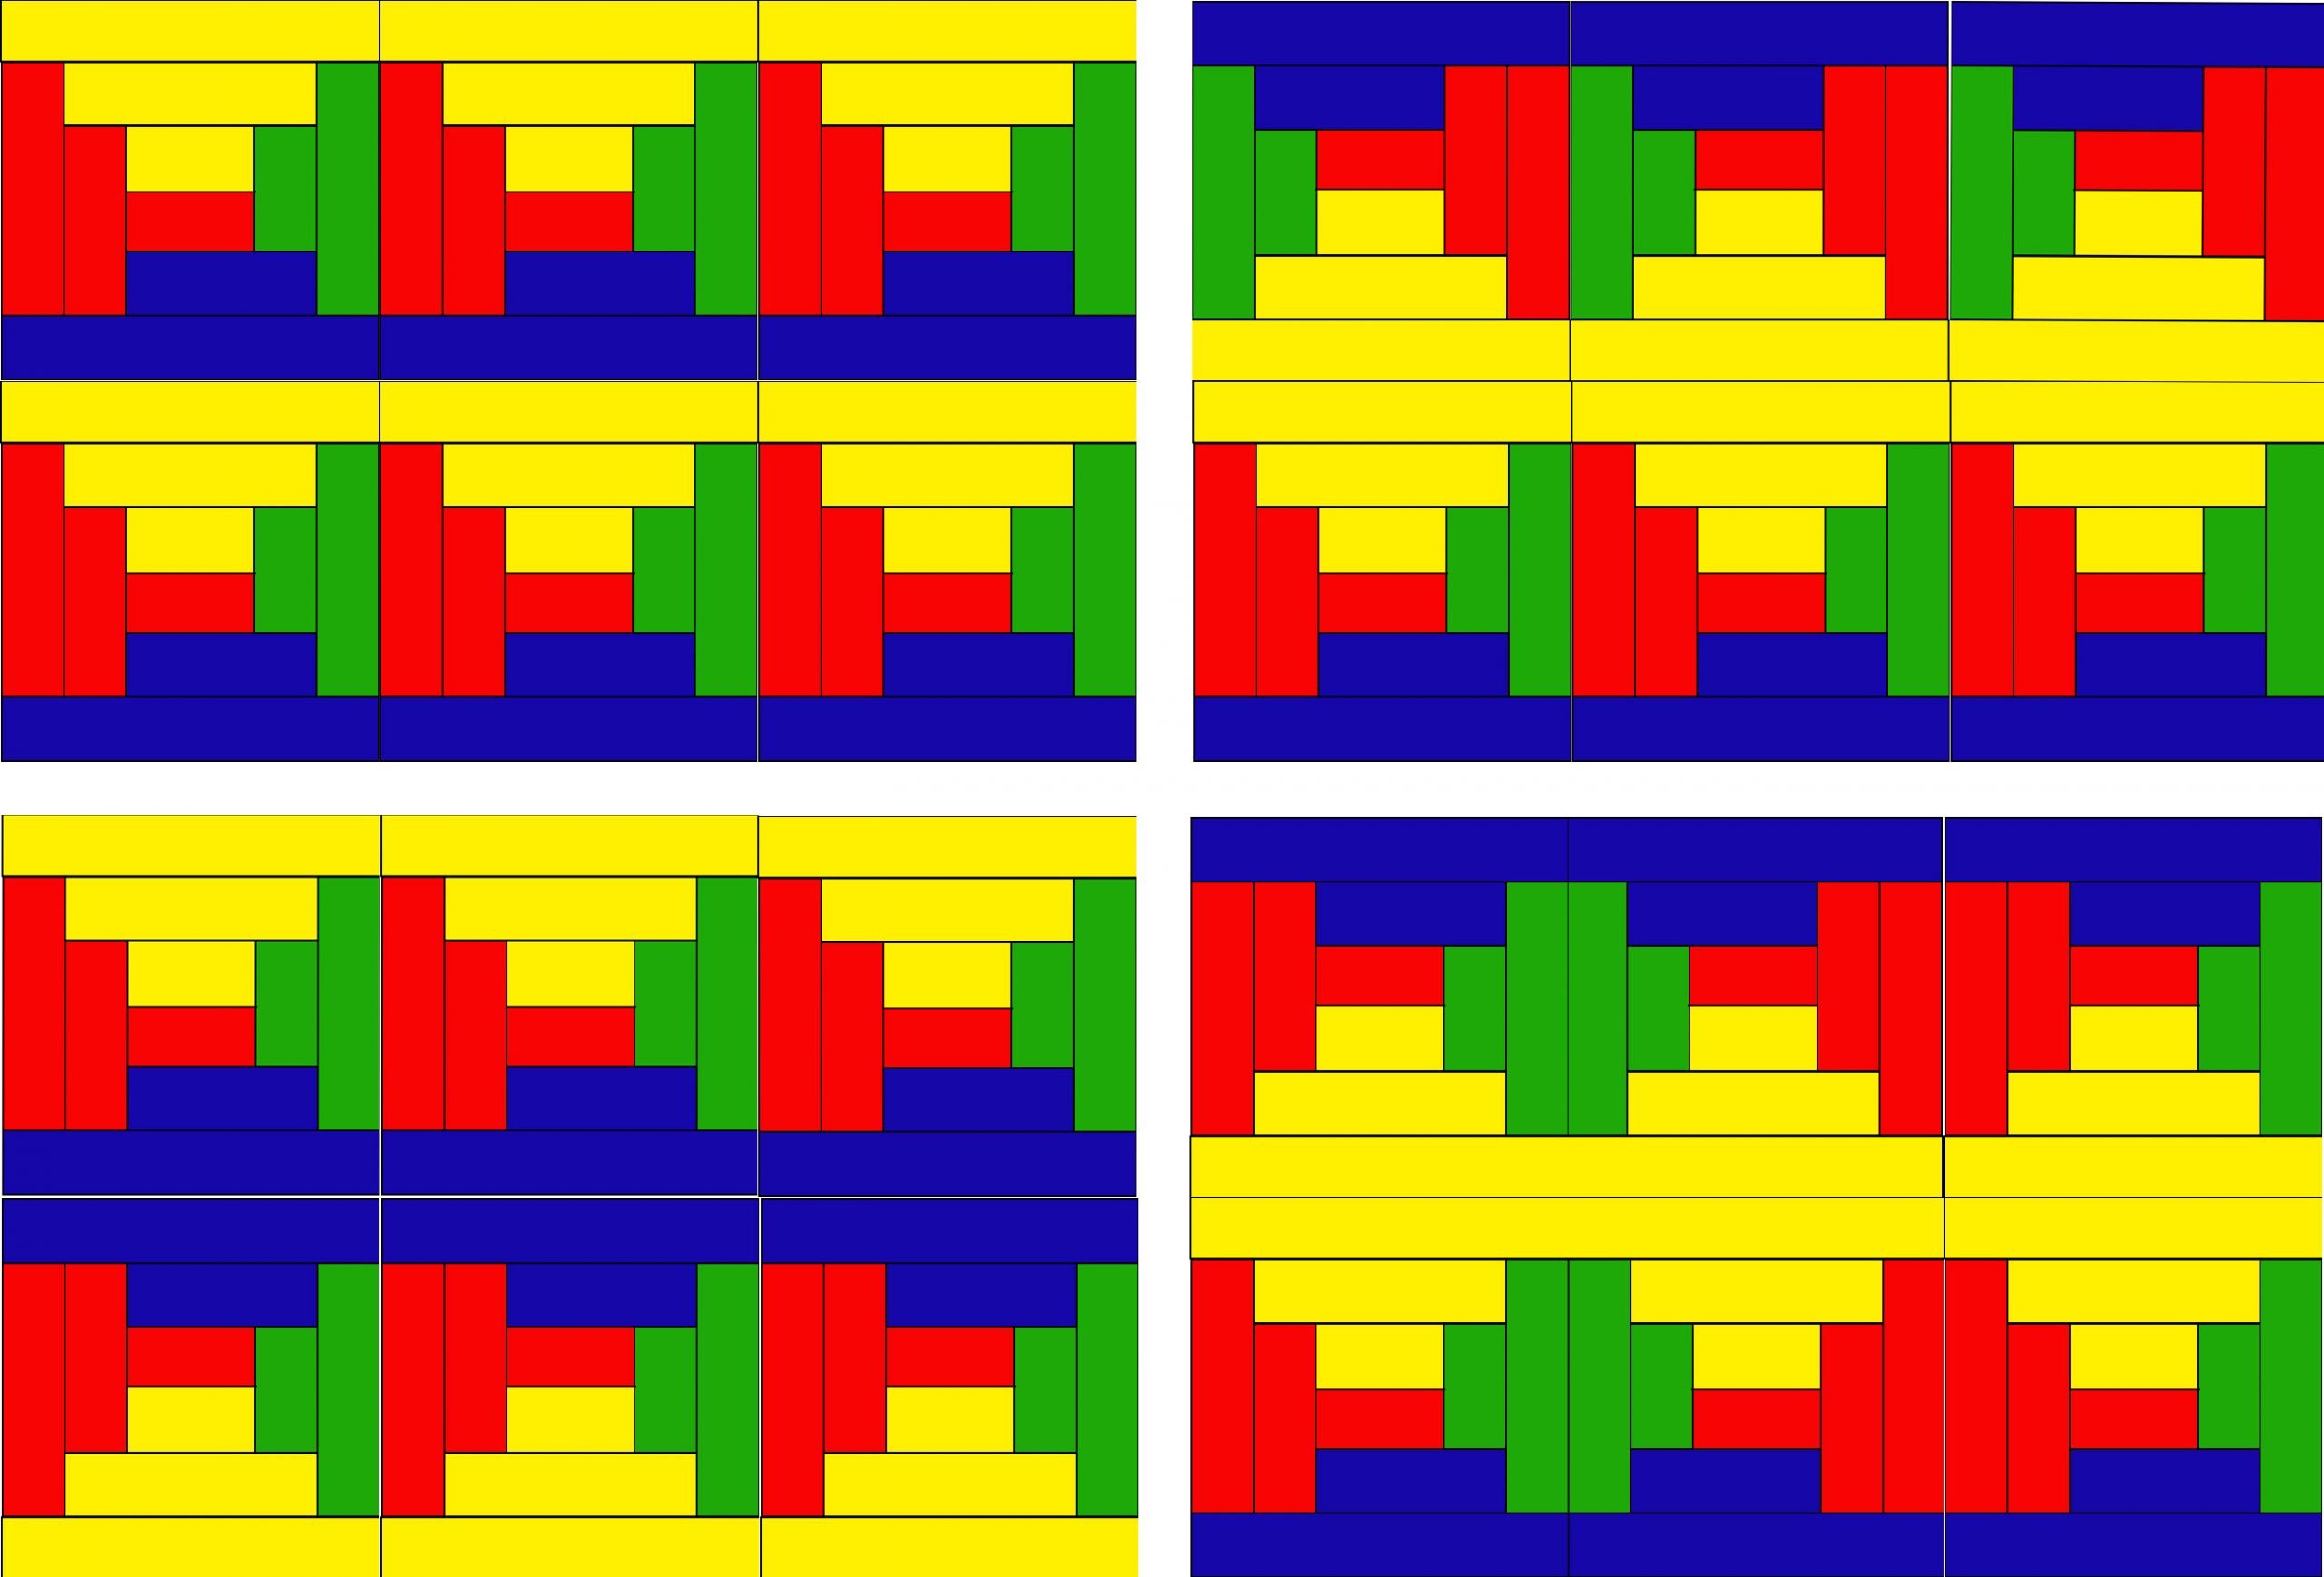 A graphic representation of 4 different rectangles made up up bars of red, yellow, green, and blue.